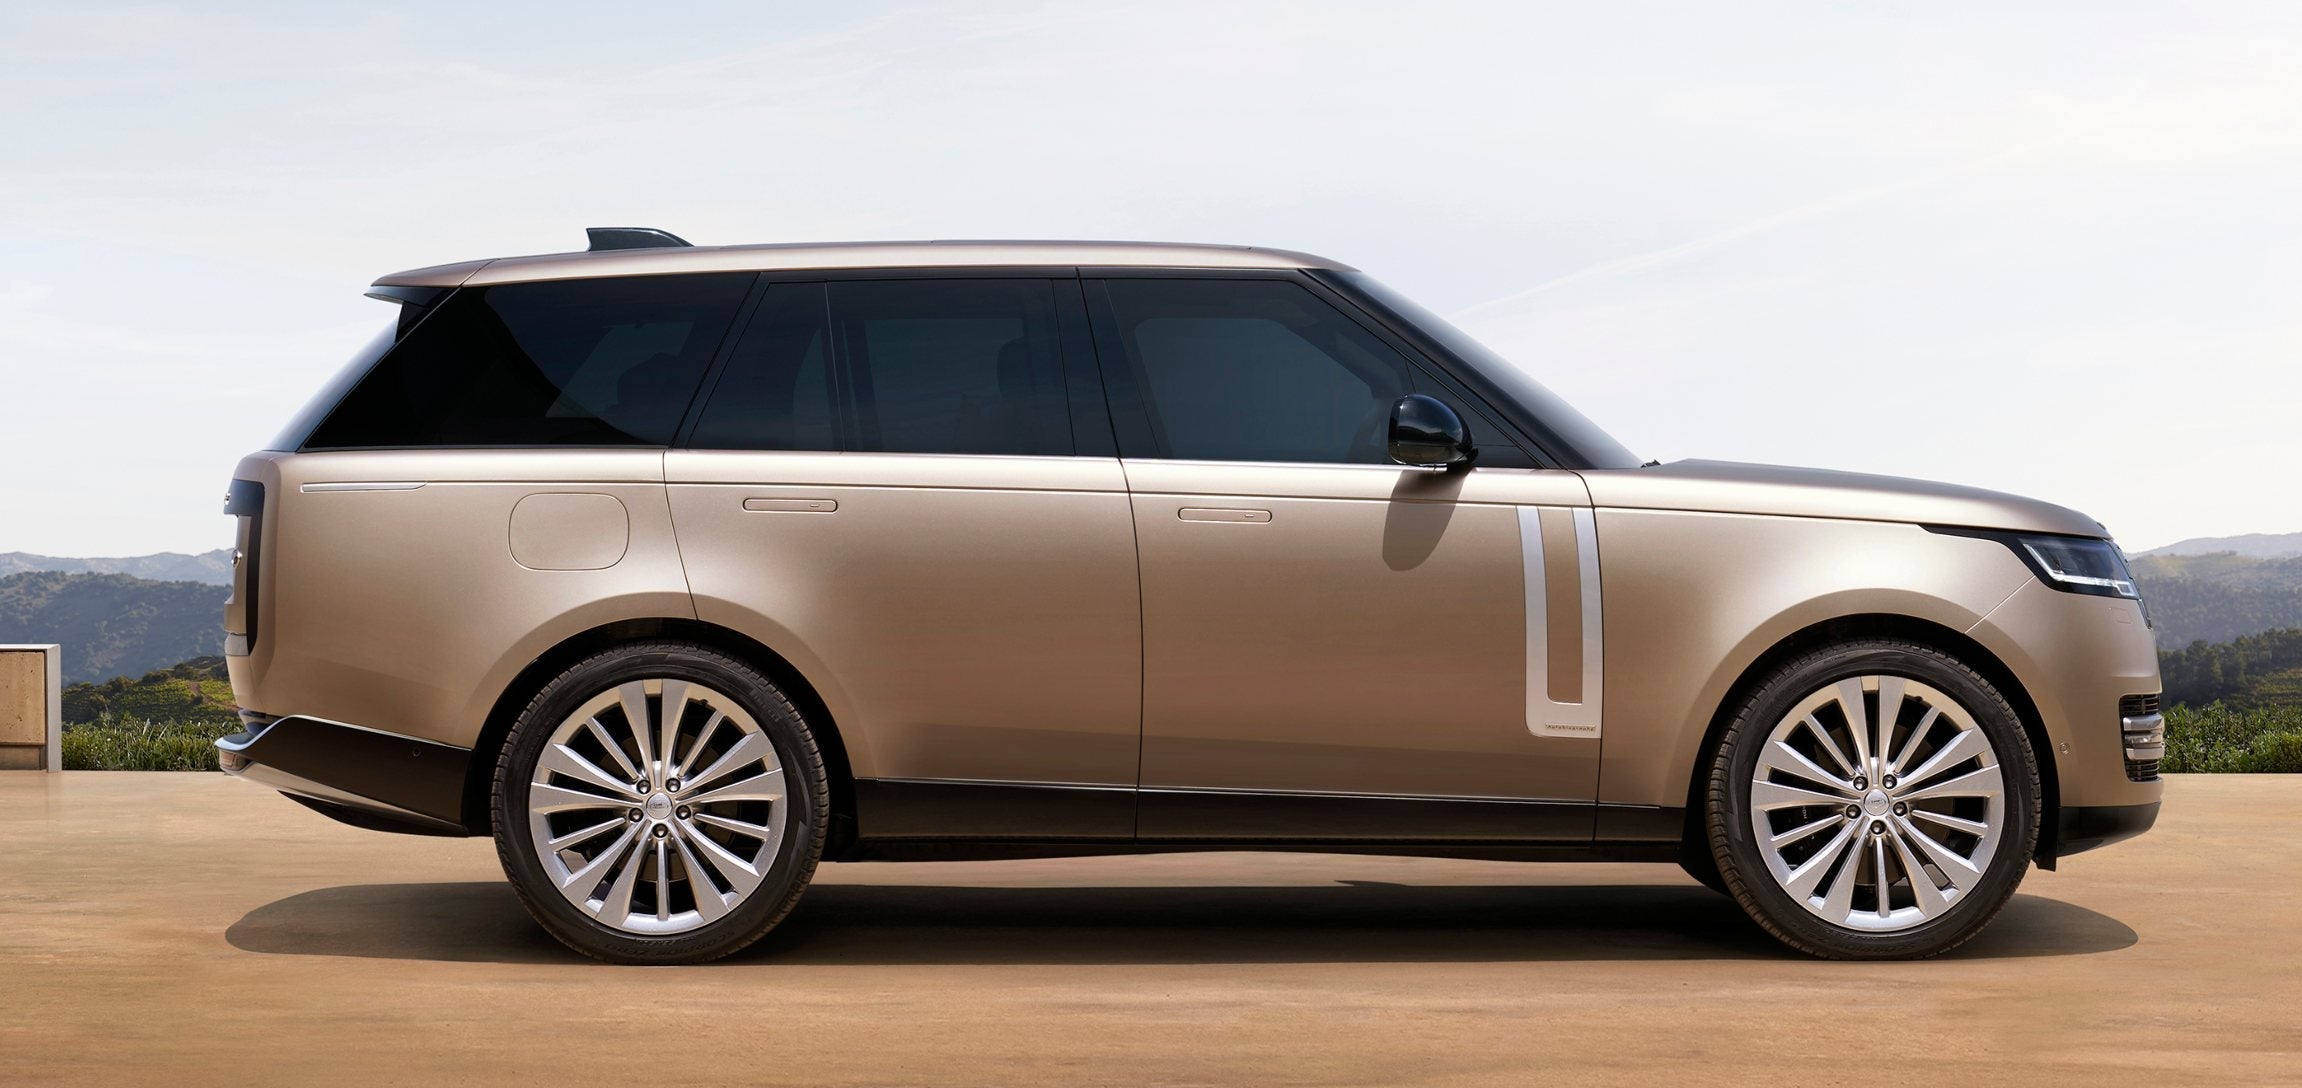 2022 Range Rover price, specs and release date heycar